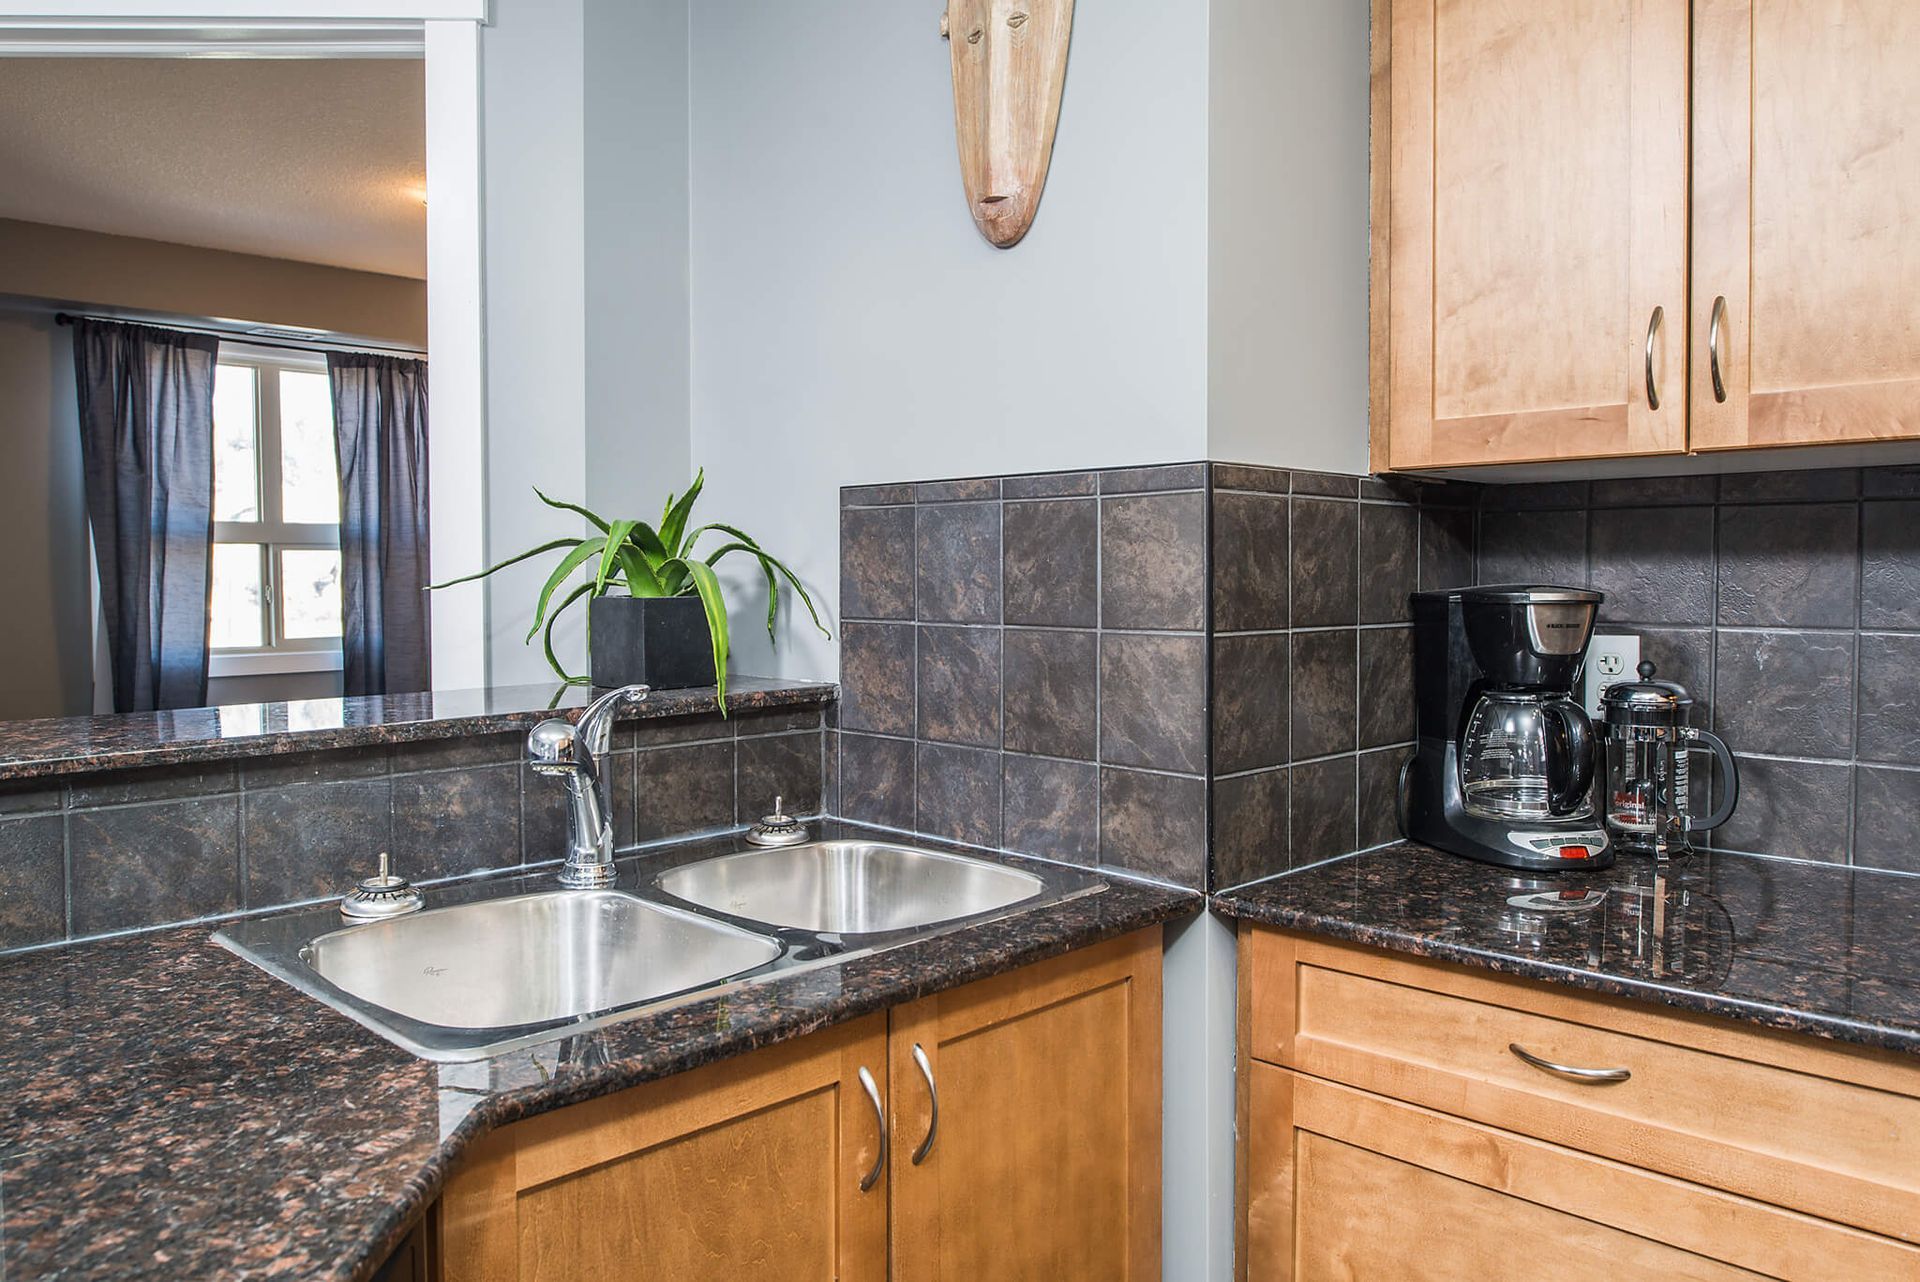 Full kitchen in the lake view condo in Lake Windermere Pointe BC Vacation Rental in Invermere hosted by Aisling Baile Property Management. 